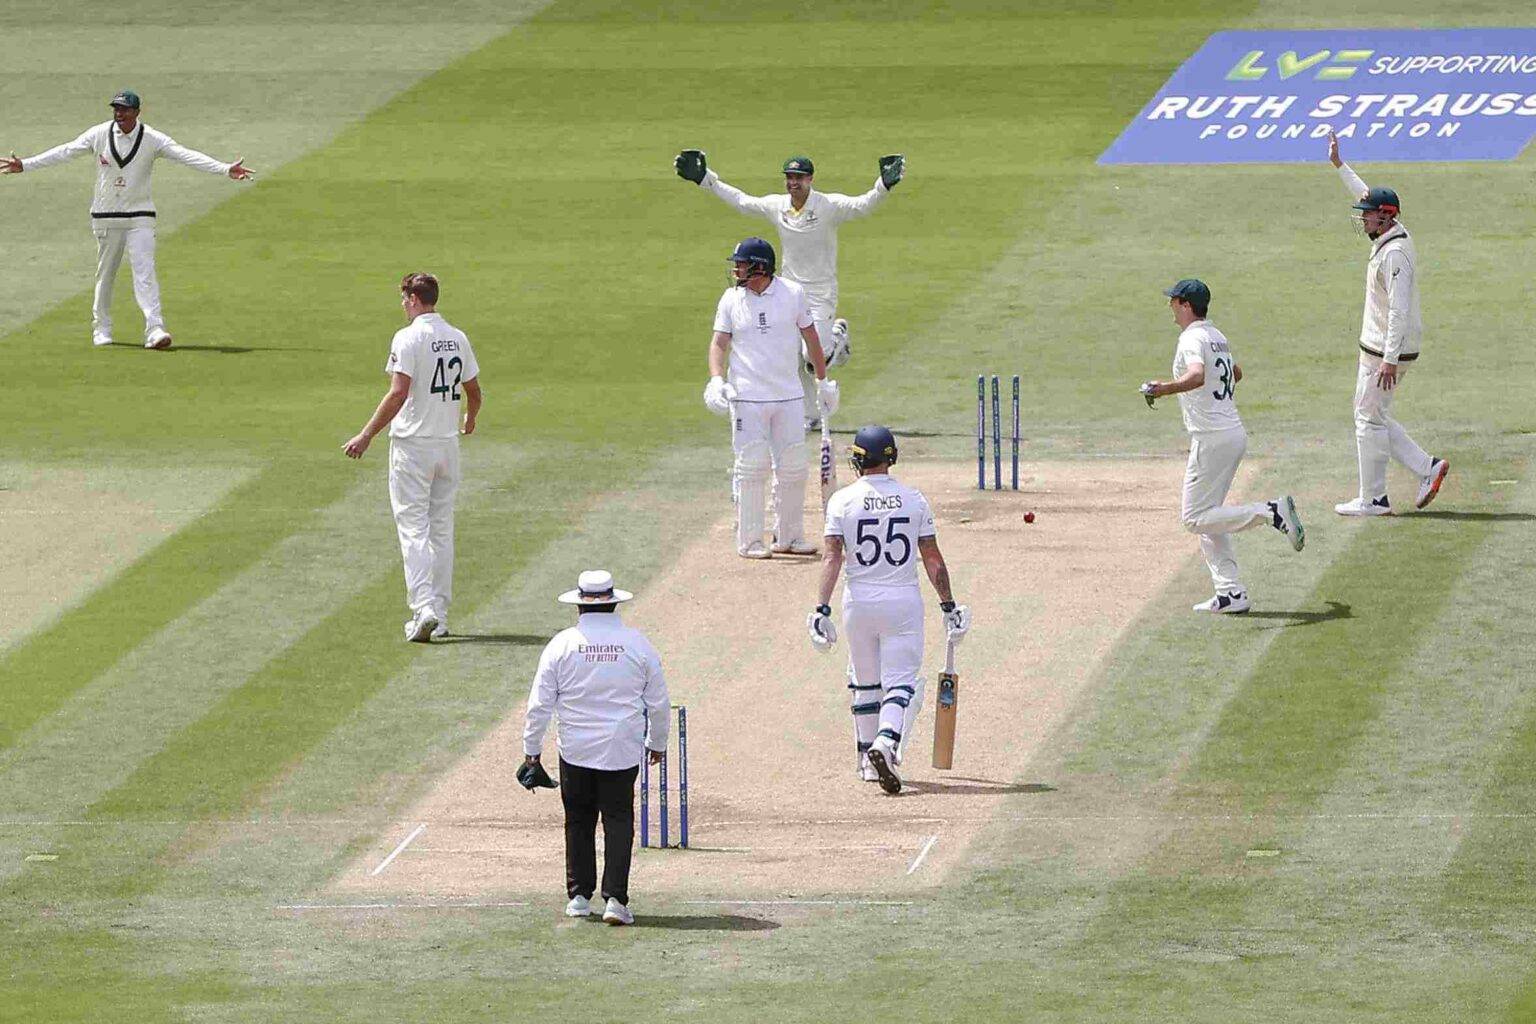 MCC suspend three members after angry confrontation with Australian players following Bairstow wicket